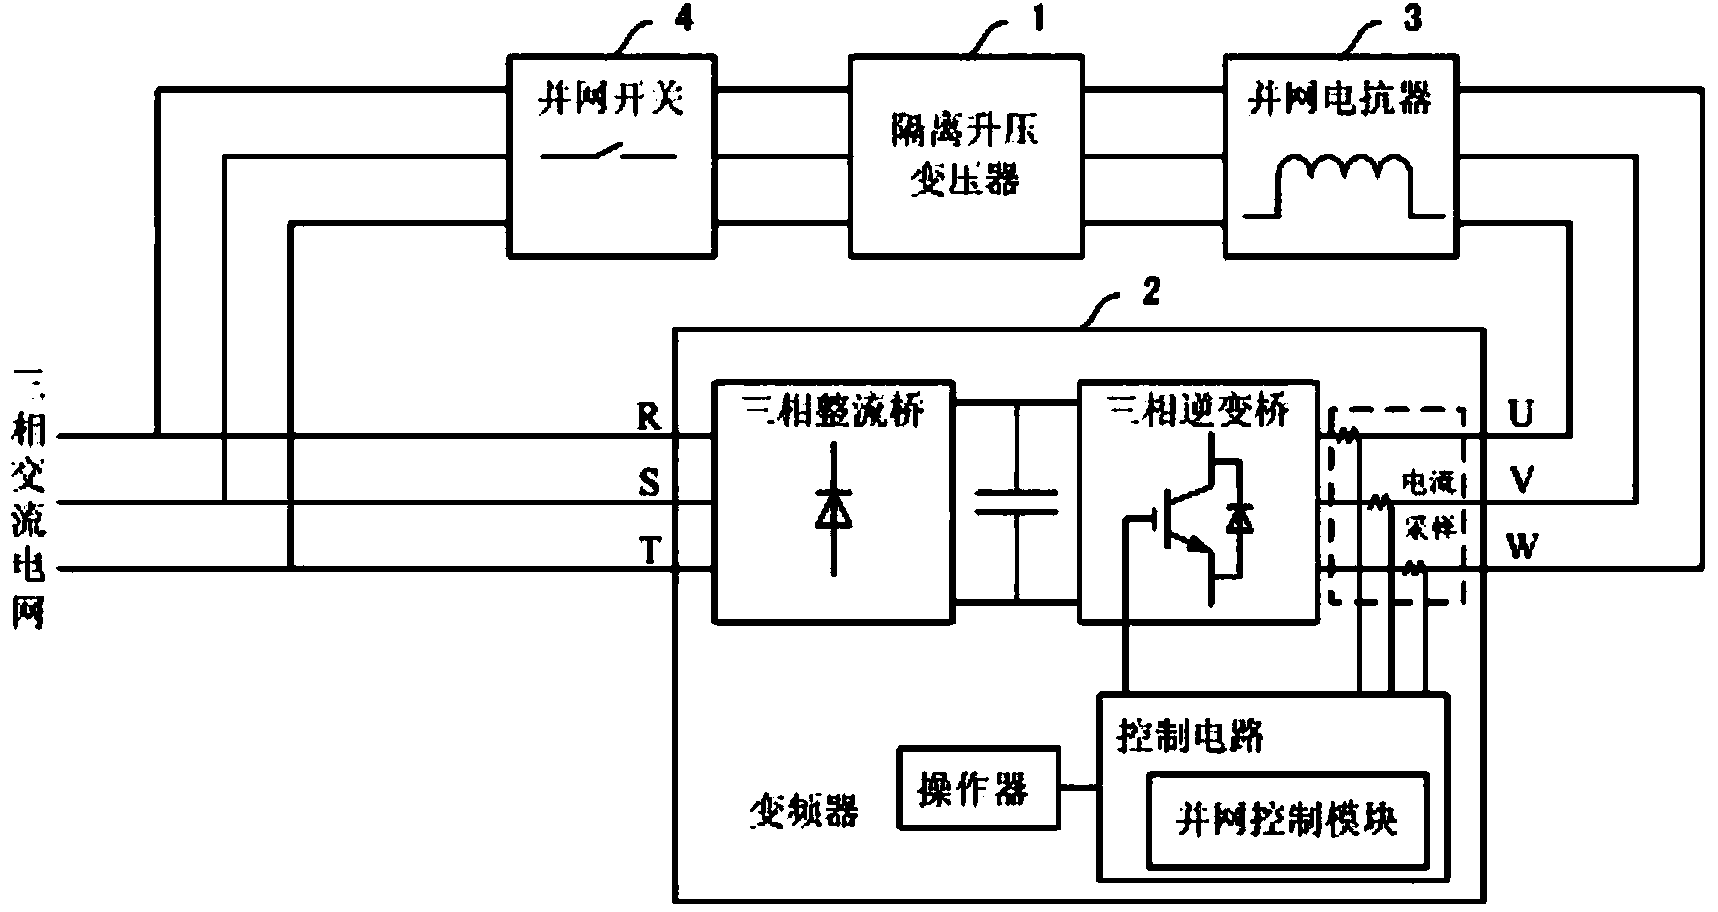 Self-circulation aging test system and test method for frequency converter